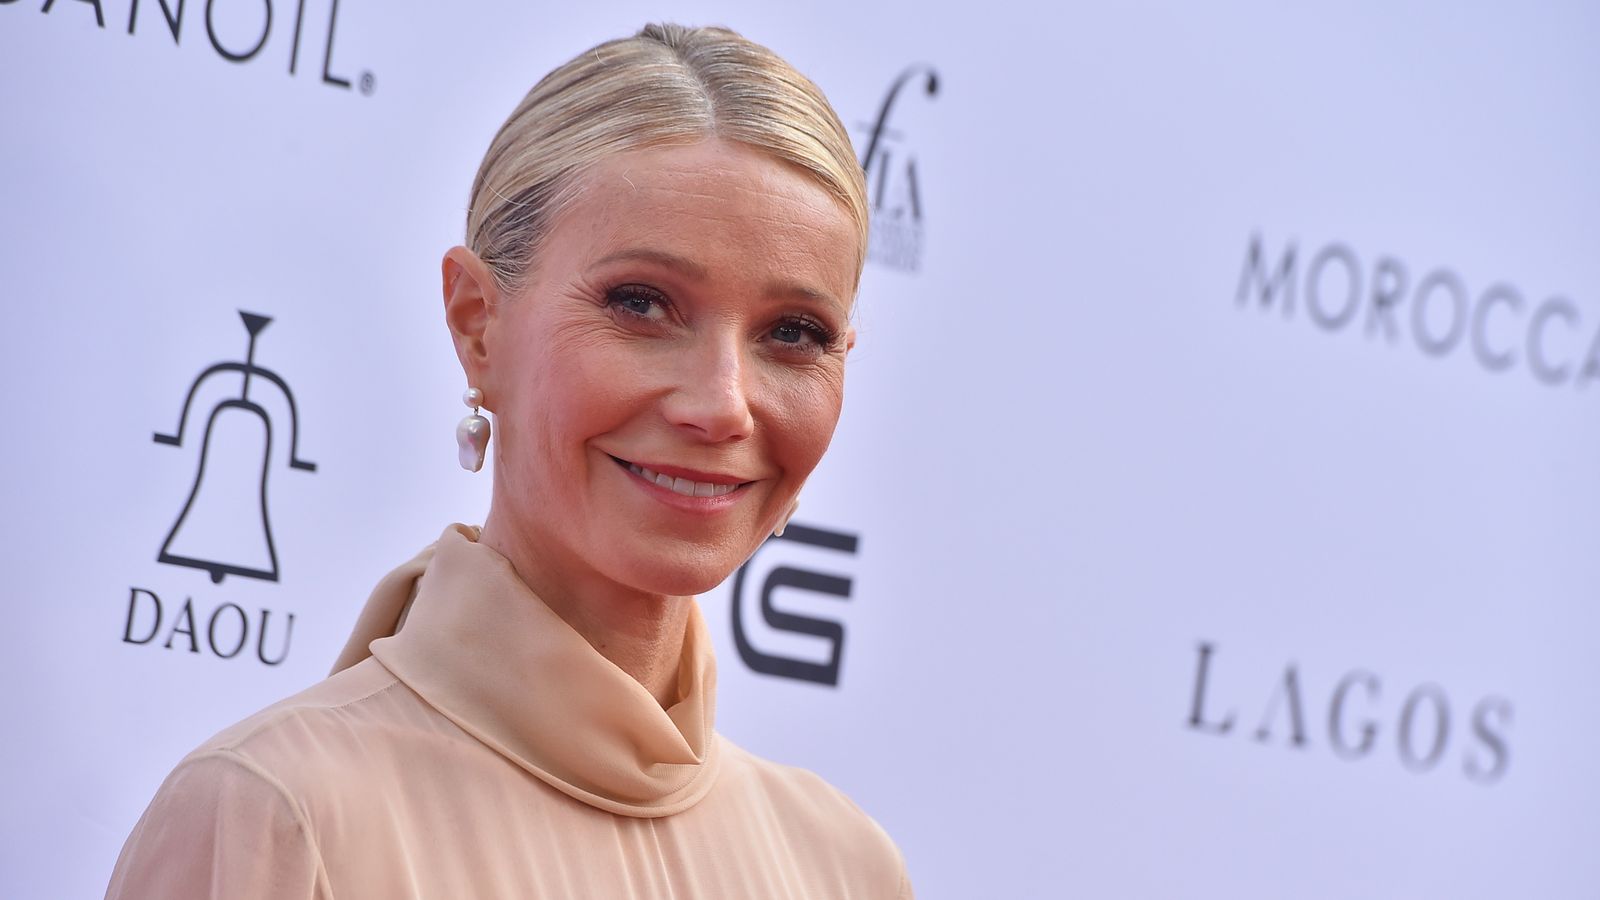 Gwenyth Paltrow calls ‘nepo baby’ an ‘ugly moniker’ after daughter Apple starts modelling career | Ents & Arts News